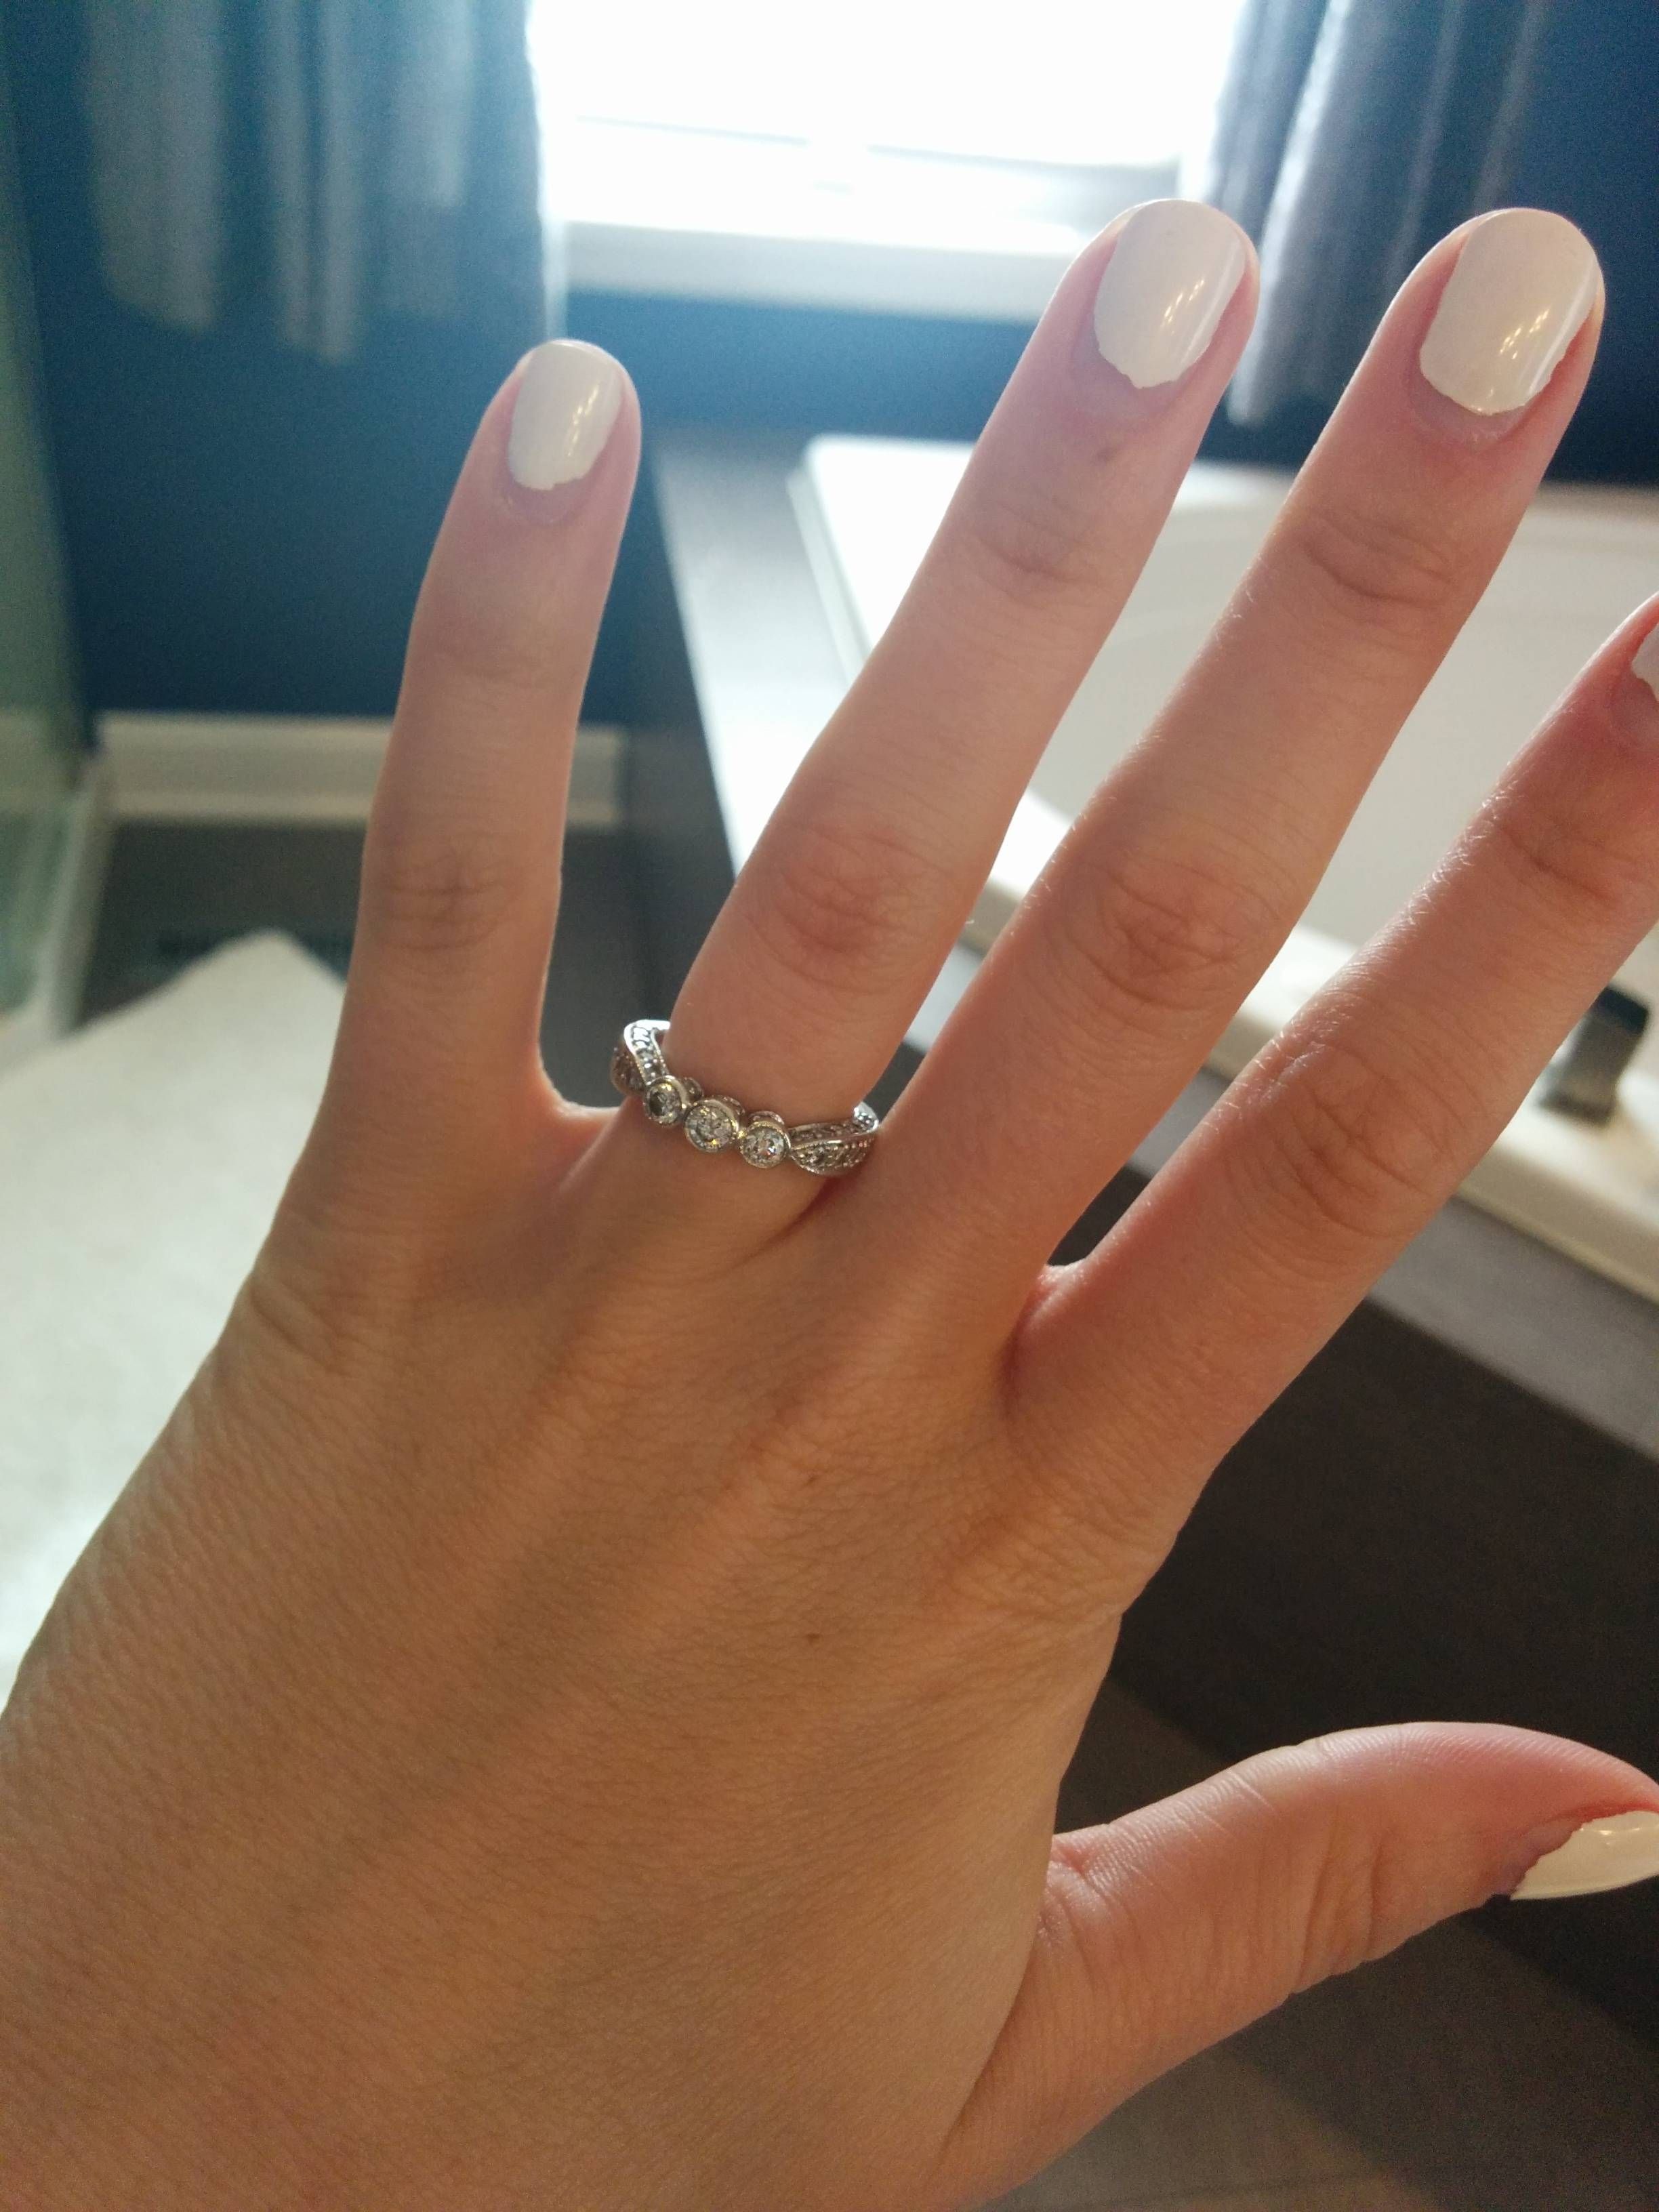 10th Anniversary Ring Upgrade Help! – Weddingbee With Most Recent 10 Year Anniversary Rings For Wife (View 2 of 15)